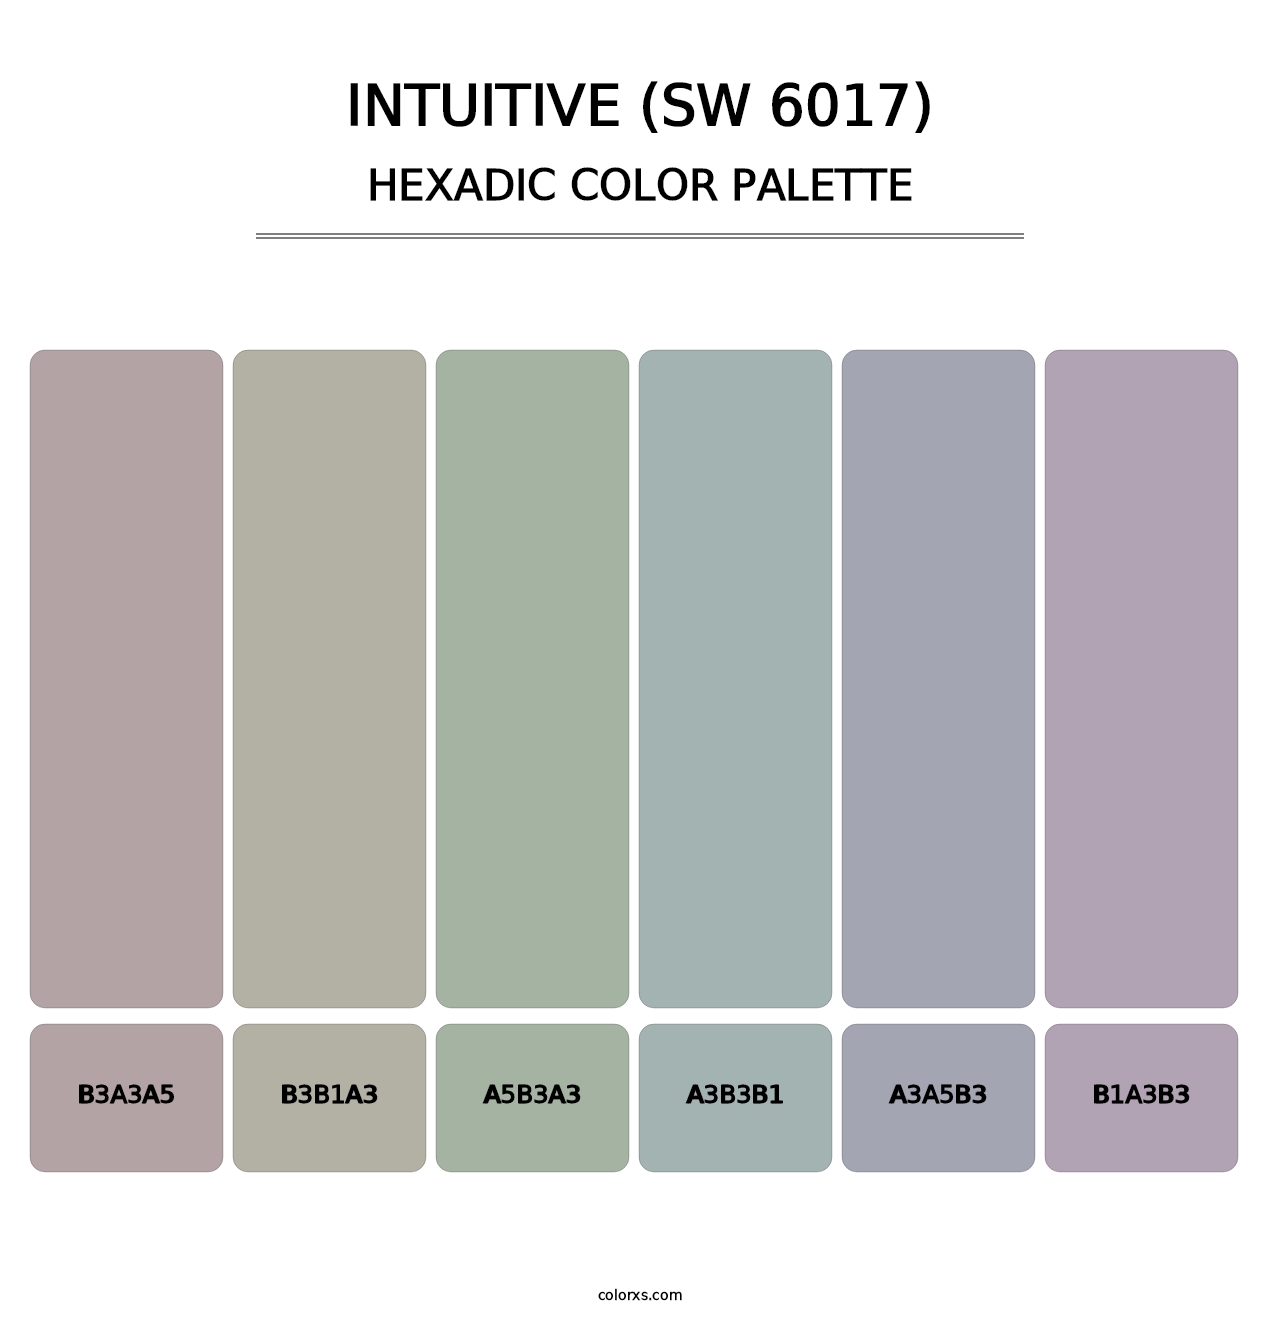 Intuitive (SW 6017) - Hexadic Color Palette